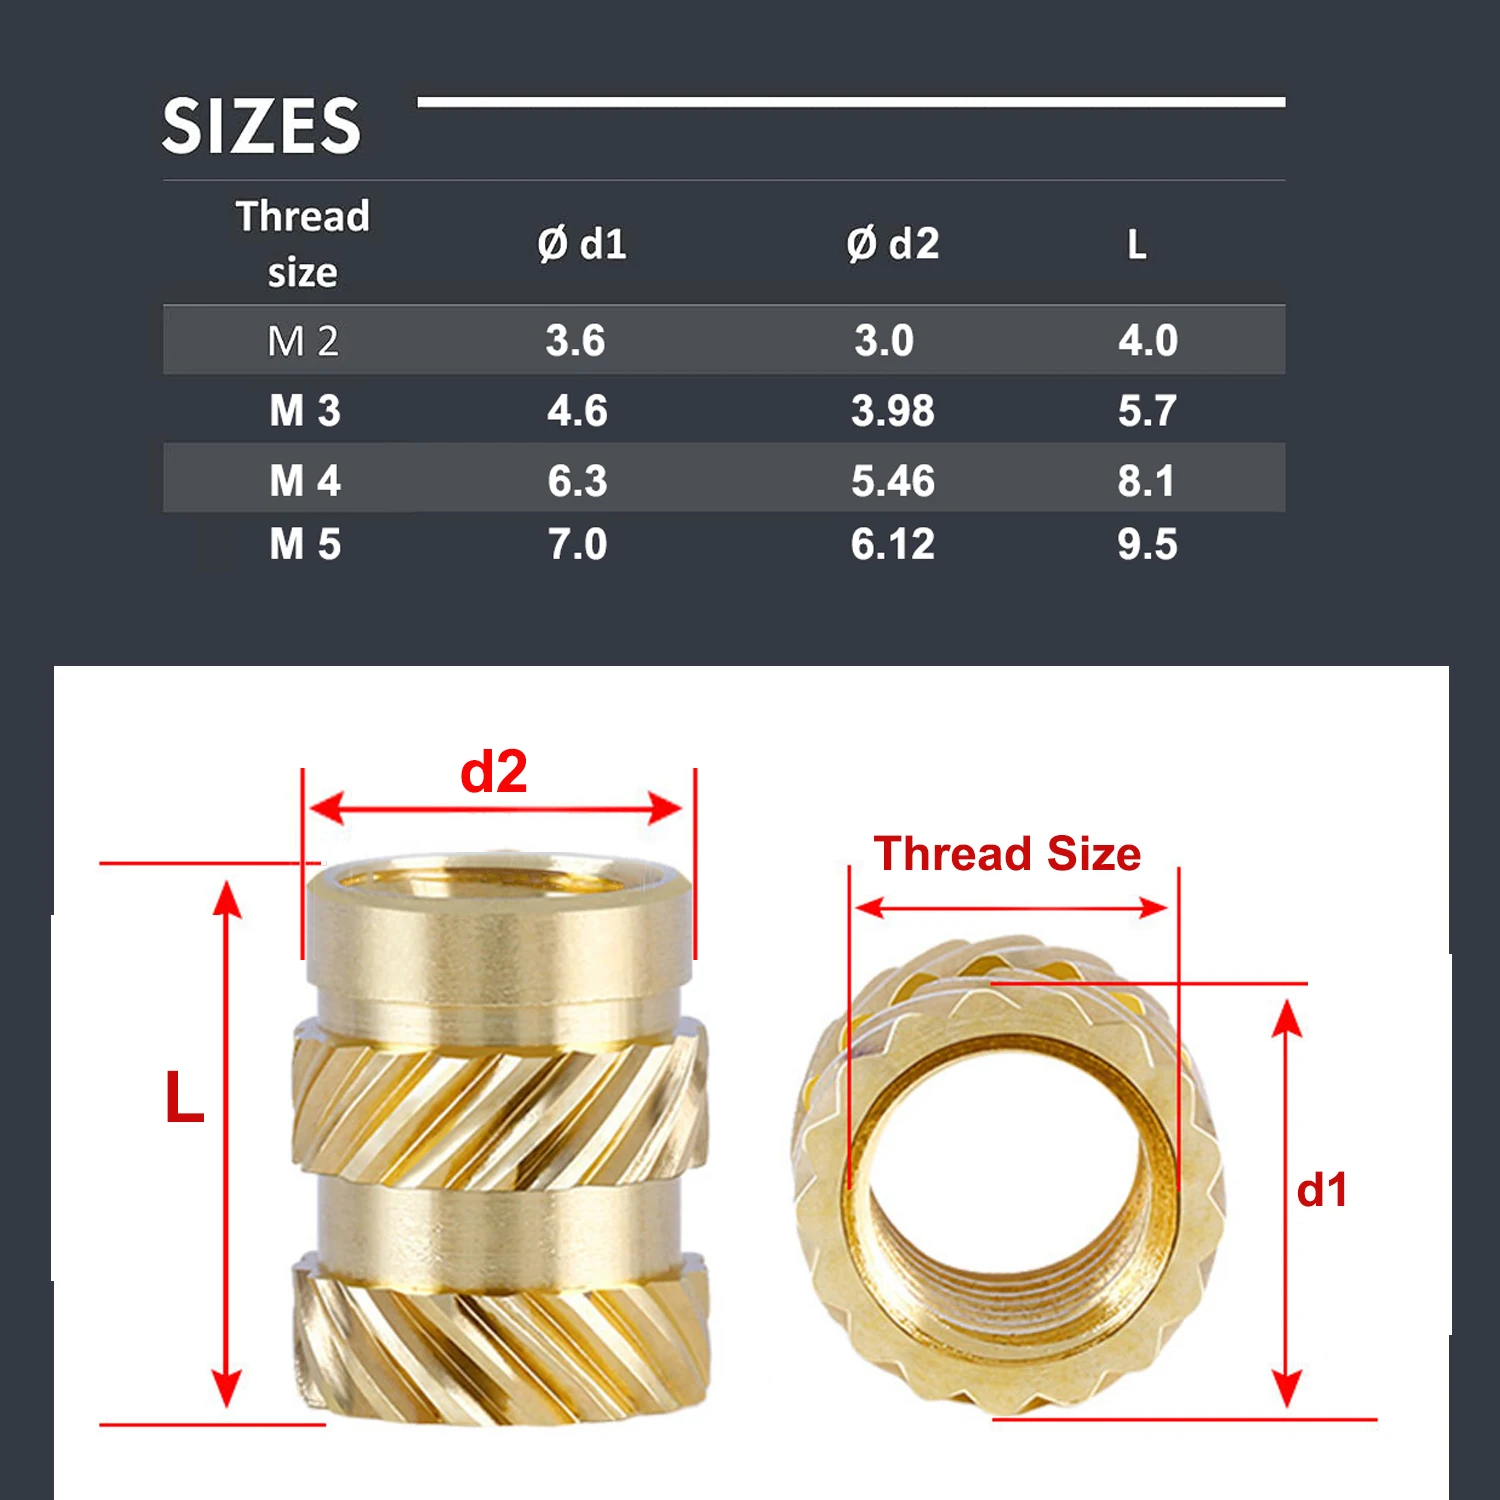 360 Pcs Threaded Insert M2 M3 M4 M5 Female Thread Nut Grinded Nuts Round  Injection Molding Brass Insert Insert Nuts Assortment Kit For Injection  Molding 3D Print Or Automotive 